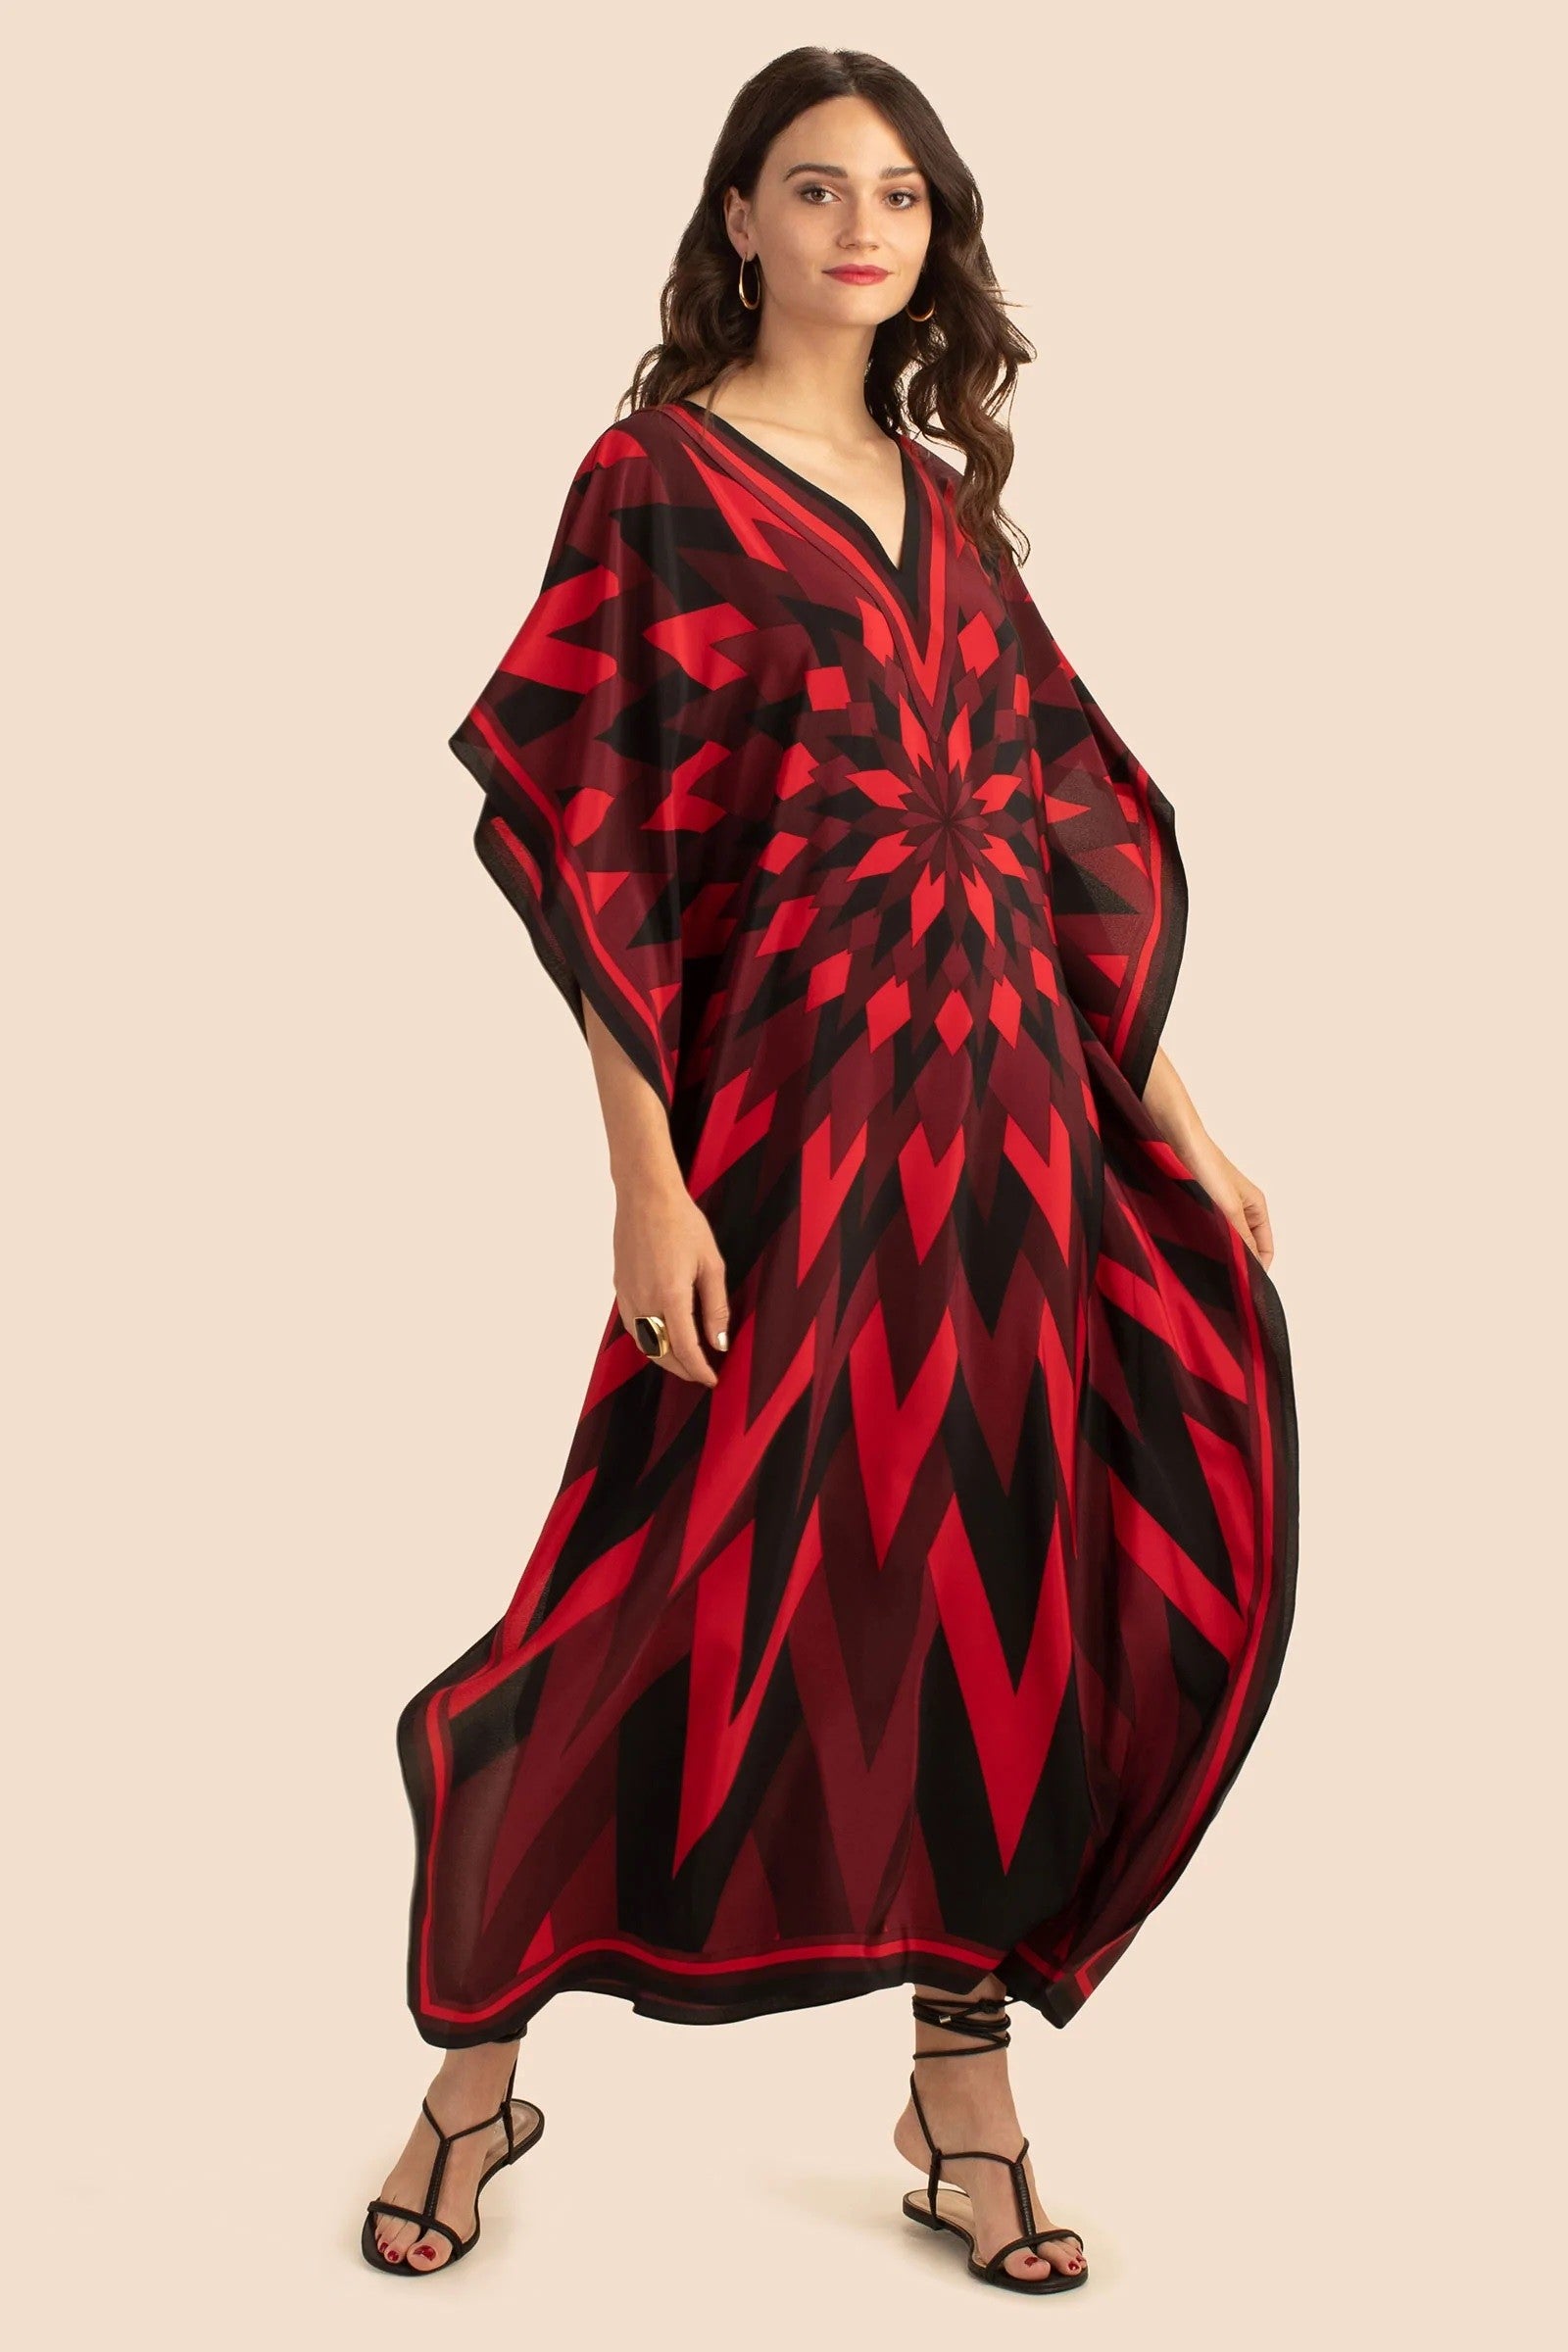 The model in the image is wearing Red Colour Soft Silk  Daily Wear Women Kaftan from Alice Milan. Crafted with the finest materials and impeccable attention to detail, the Kaftan / Dress looks premium, trendy, luxurious and offers unparalleled comfort. It’s a perfect clothing option for loungewear, resort wear, party wear or for an airport look. The woman in the image looks happy, and confident with her style statement putting a happy smile on her face.